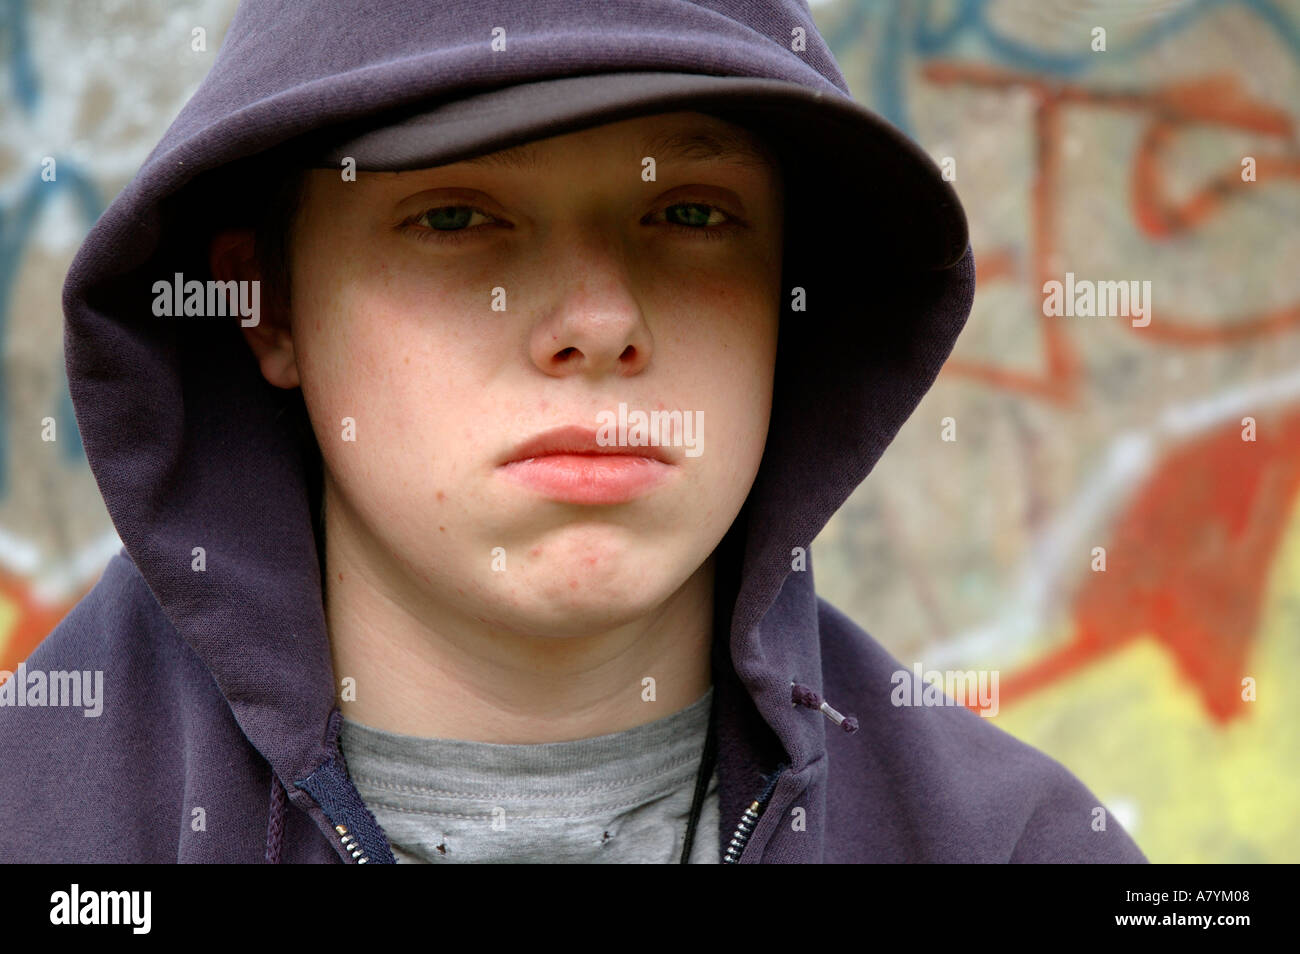 Young boy hanging around the streets dressed in hoodie looking threatening and bored. Stock Photo